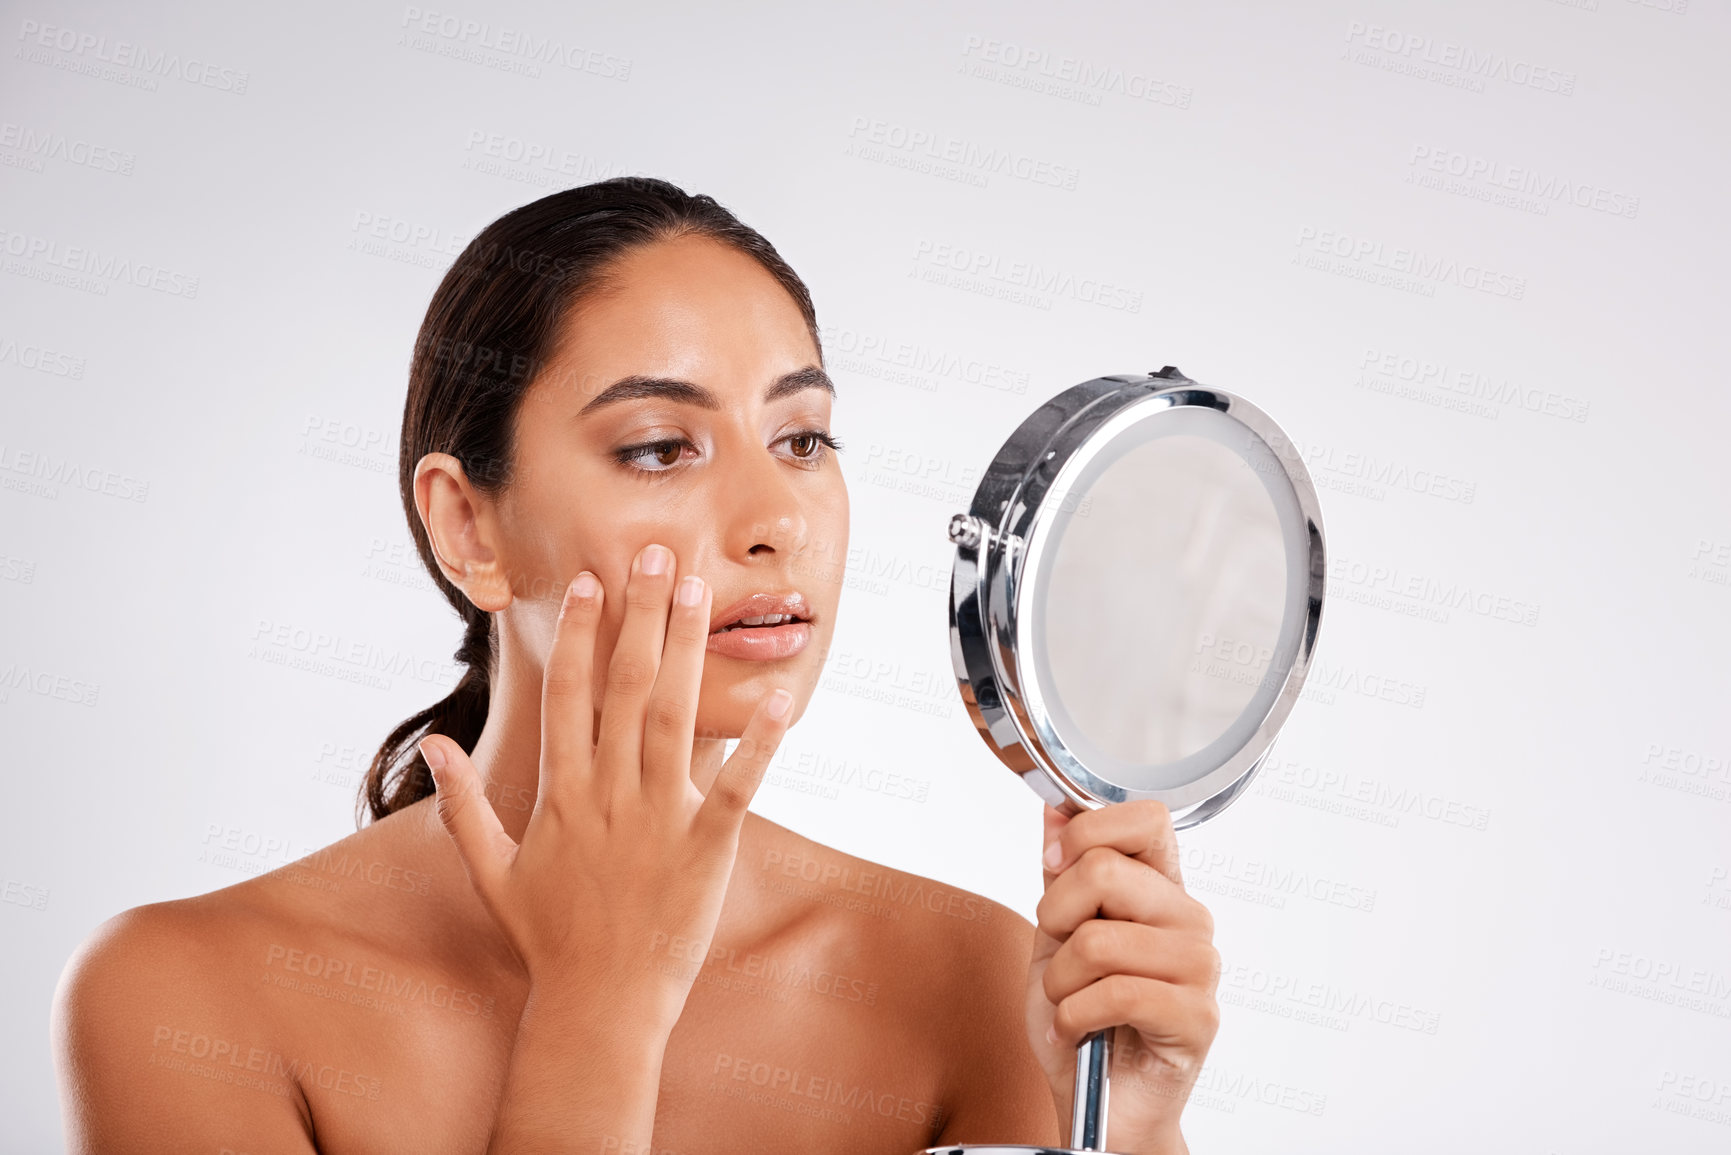 Buy stock photo Studio shot of a beautiful young woman examining her skin in a handheld mirror against a gray background